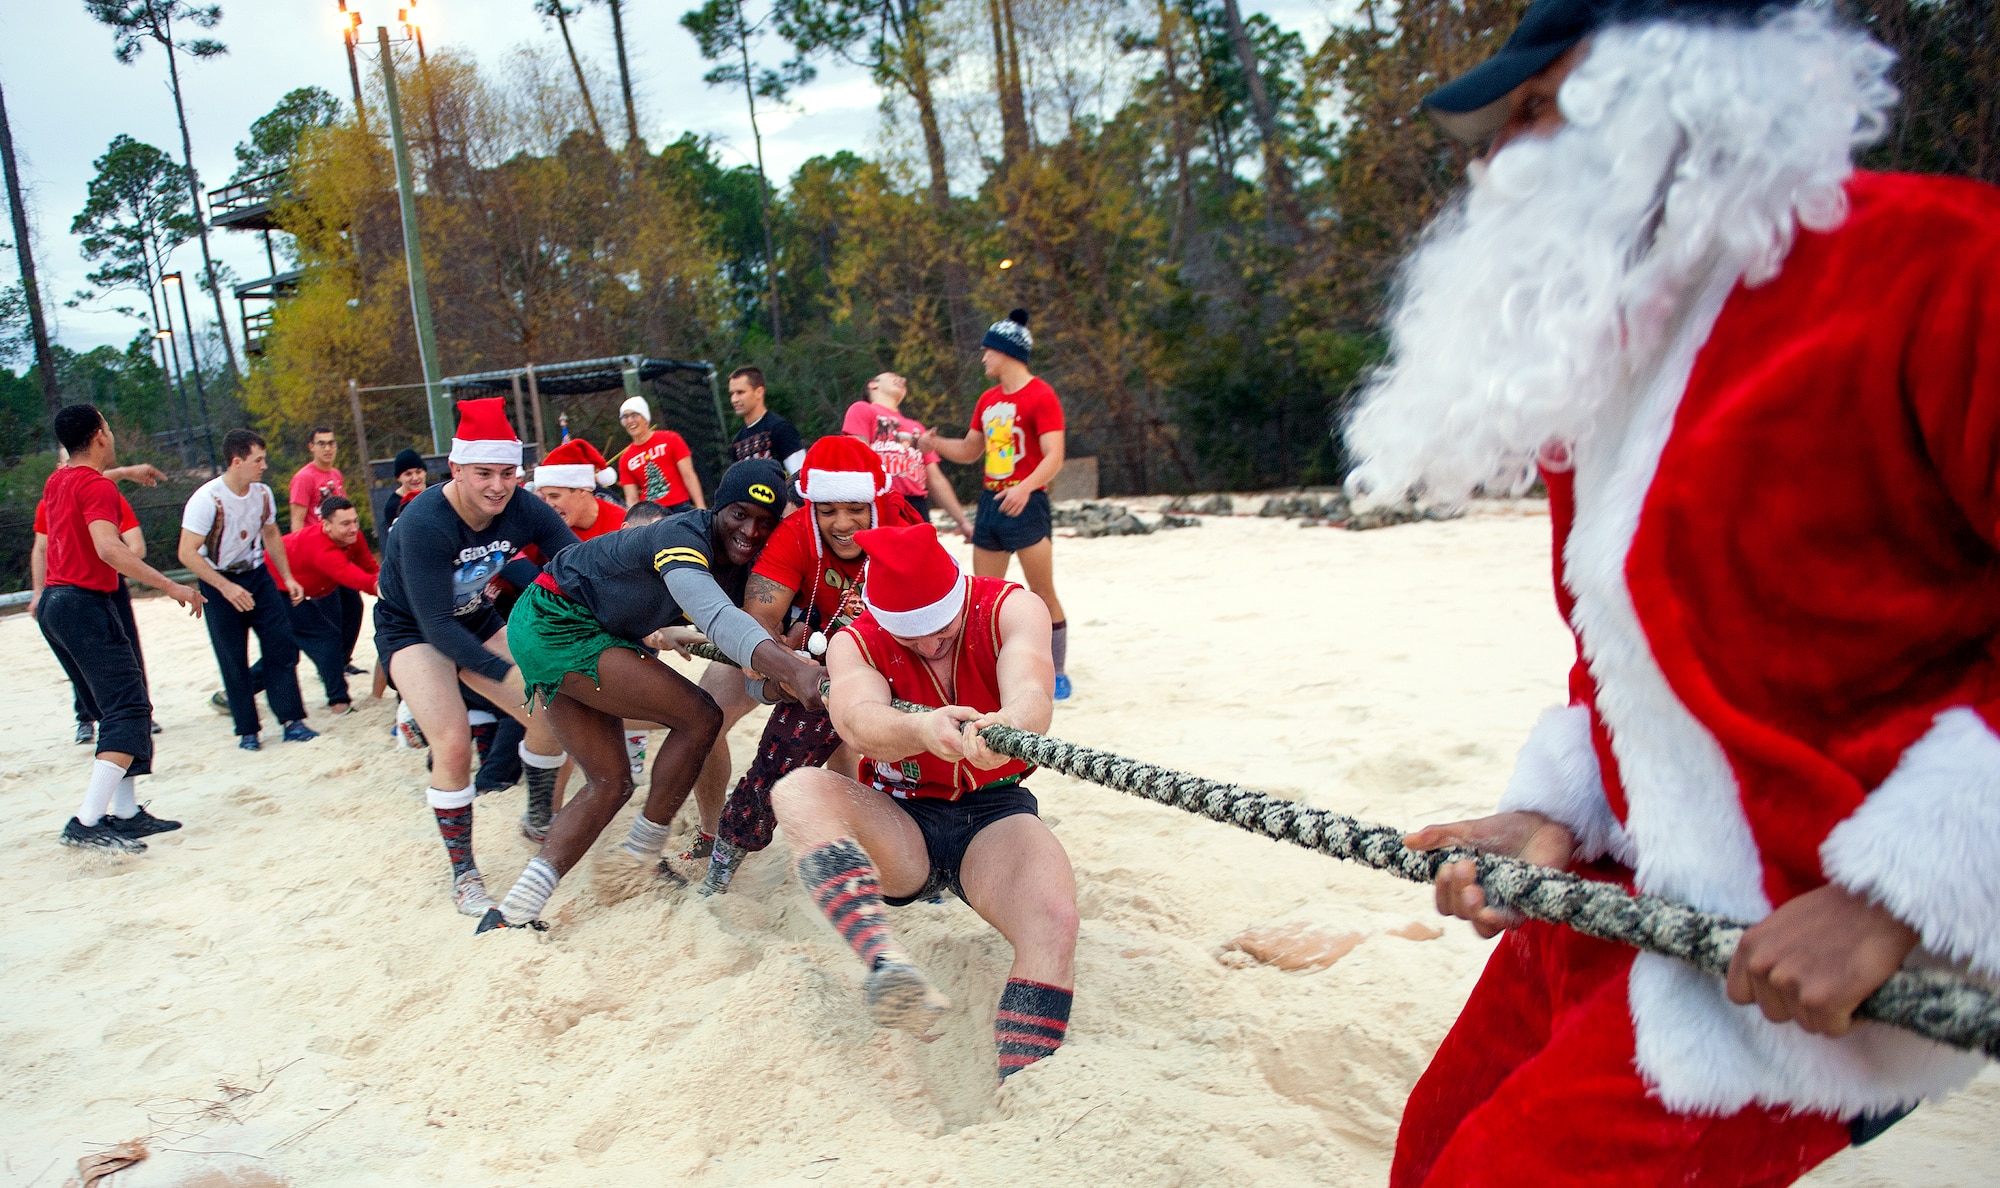 Tactical Air Control Party candidates face off against Santa and TACP instructors in a Tug-of-War competition during the annual TACP Christmas PT session on Hurlburt Field, Fla., Dec 19, 2014. More than 100 Tactical Air Control Party candidates and cadre, dressed as elves, Santa and one as a fairy during the PT session. (U.S. Air Force photo/ Staff Sgt. Kentavist P. Brackin)